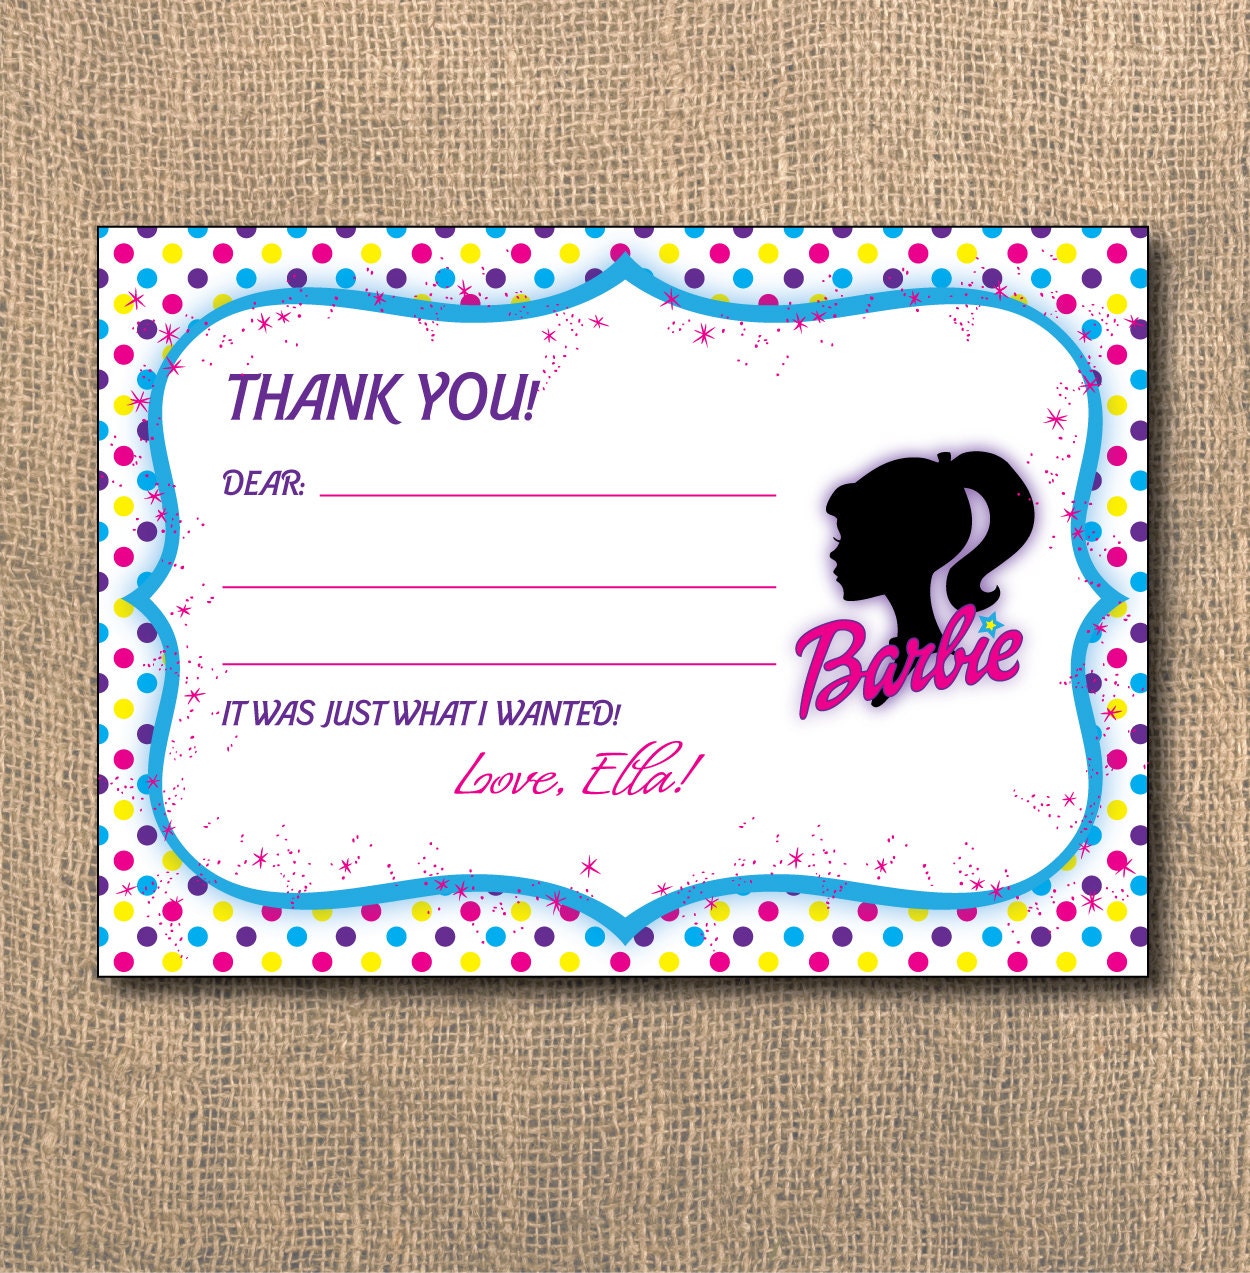 printable-5x7-barbie-thank-you-card-by-dginvites-on-etsy